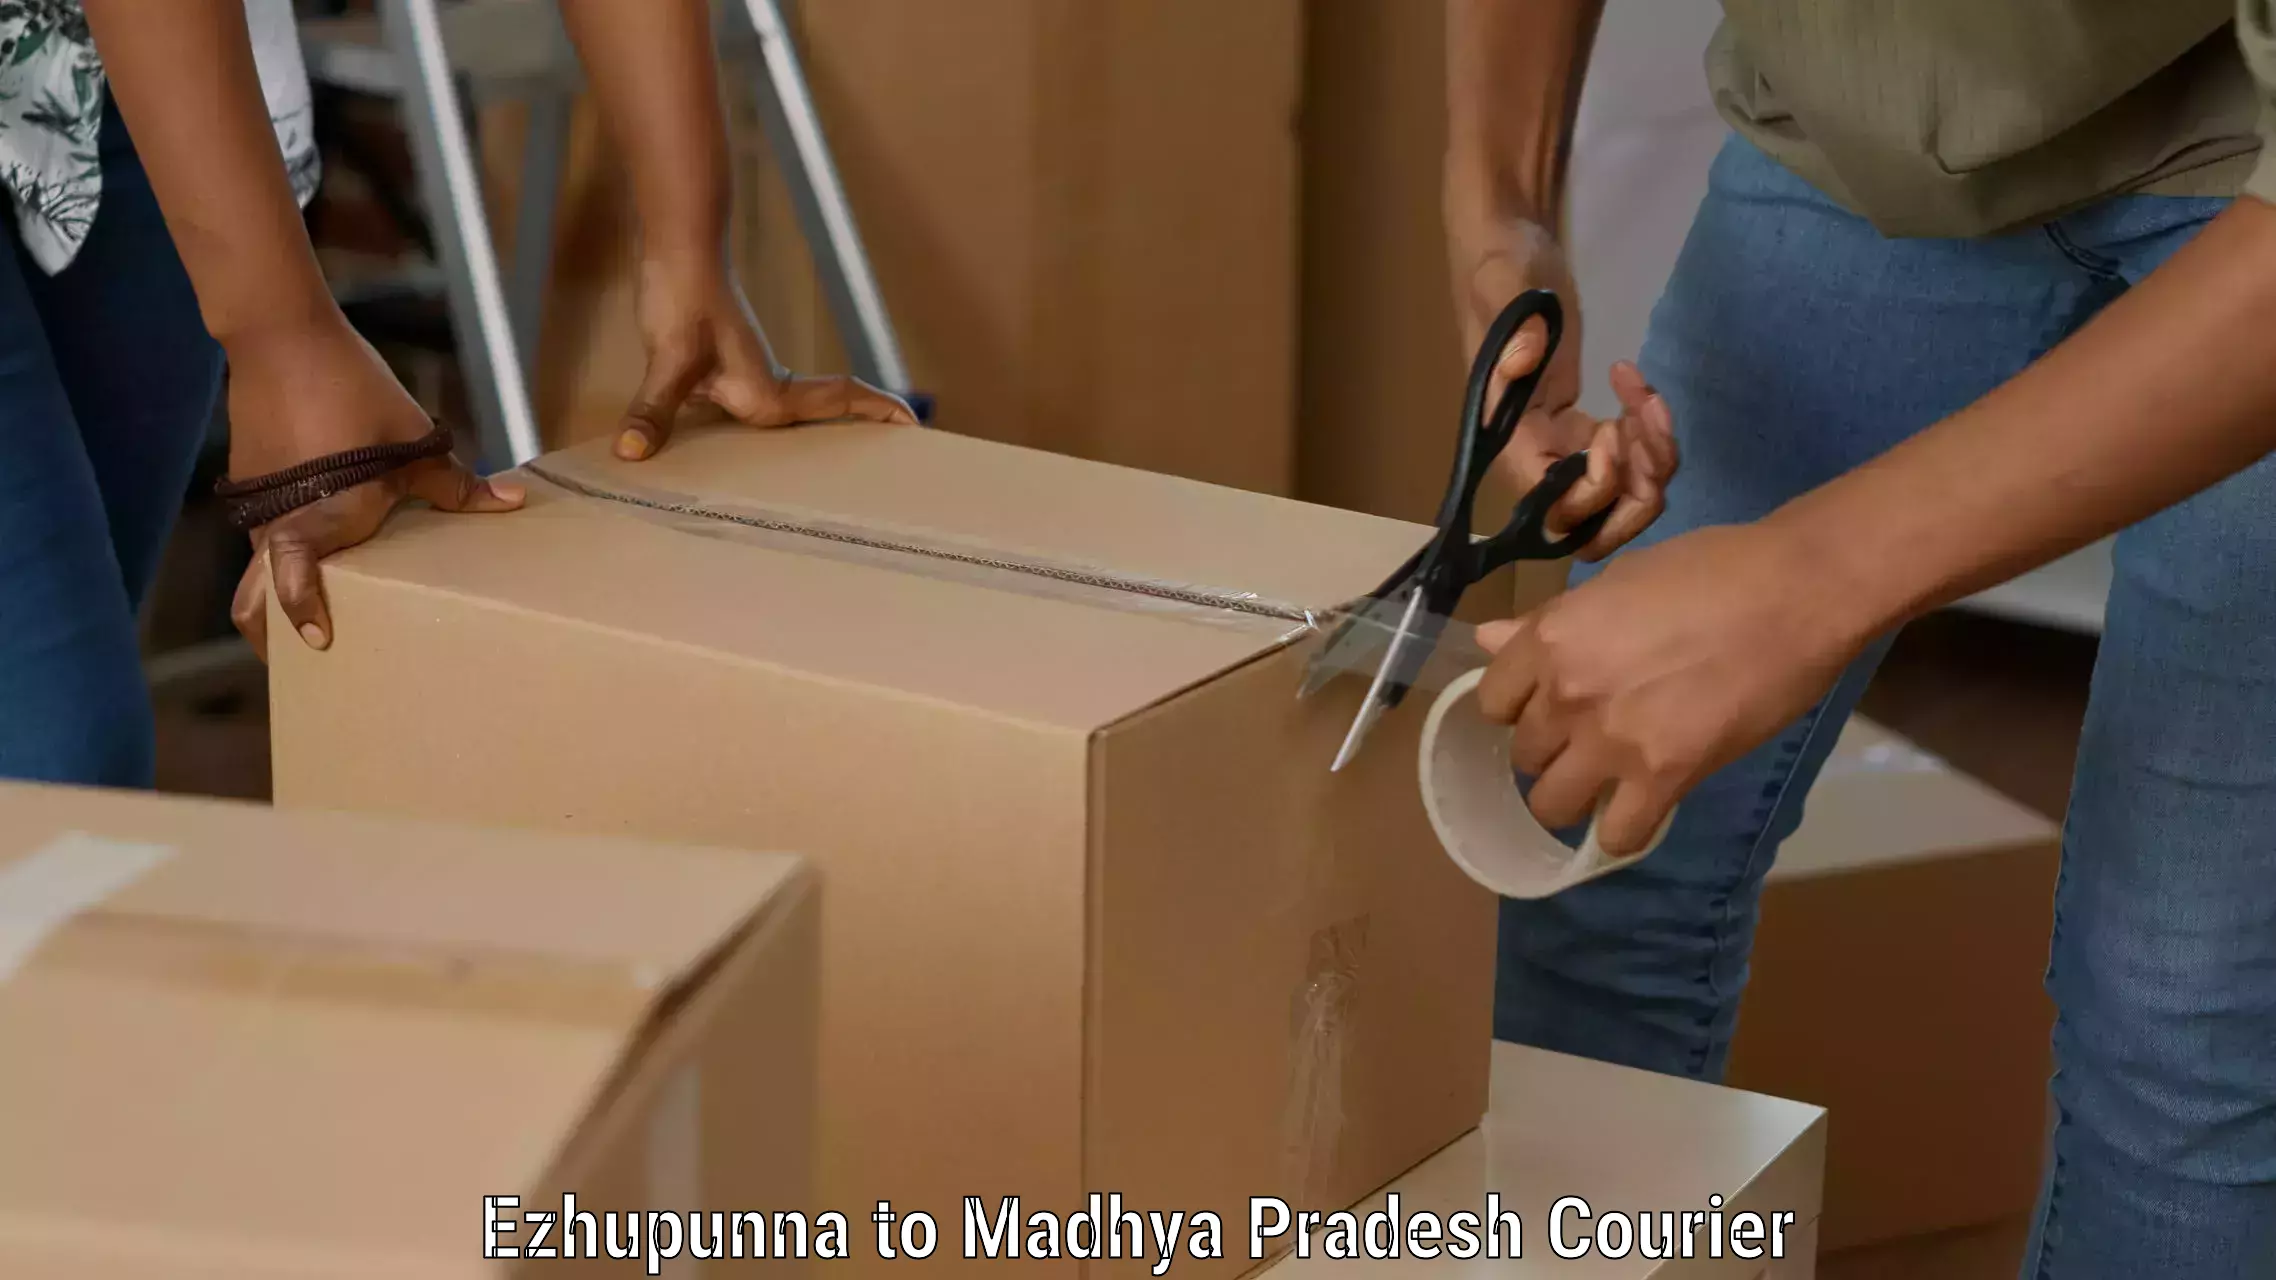 State-of-the-art courier technology Ezhupunna to Waraseoni